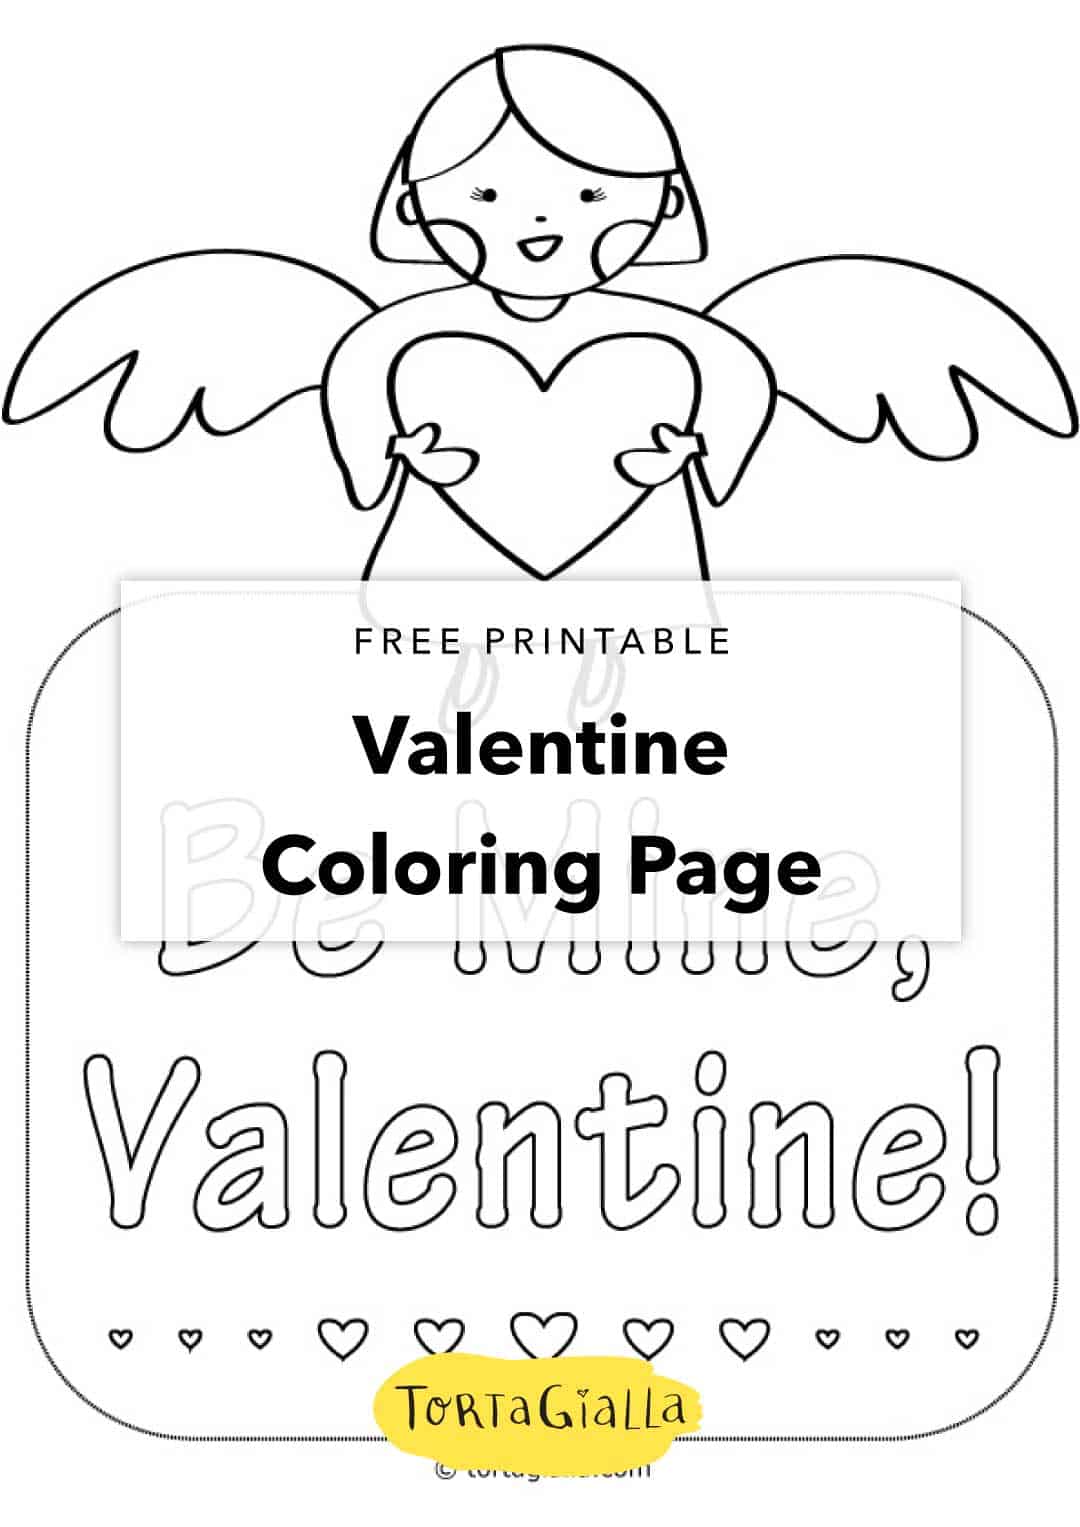 Free Printable - Valentine Coloring Page